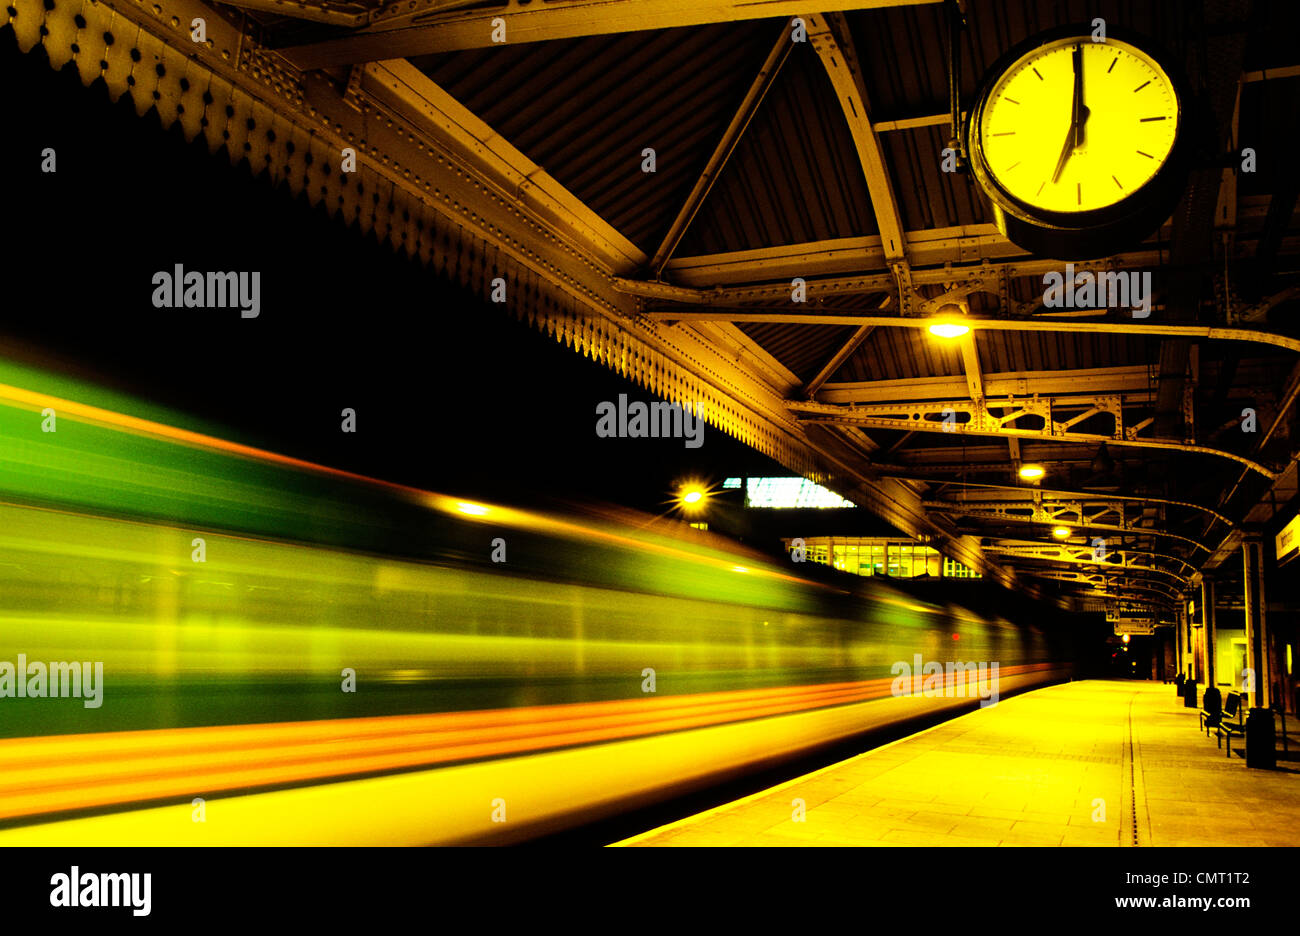 Station Clock showing Seven o'clock,time of departure for speeding train from an empty station platform Nottingham station England, UK,GB, Europe Stock Photo